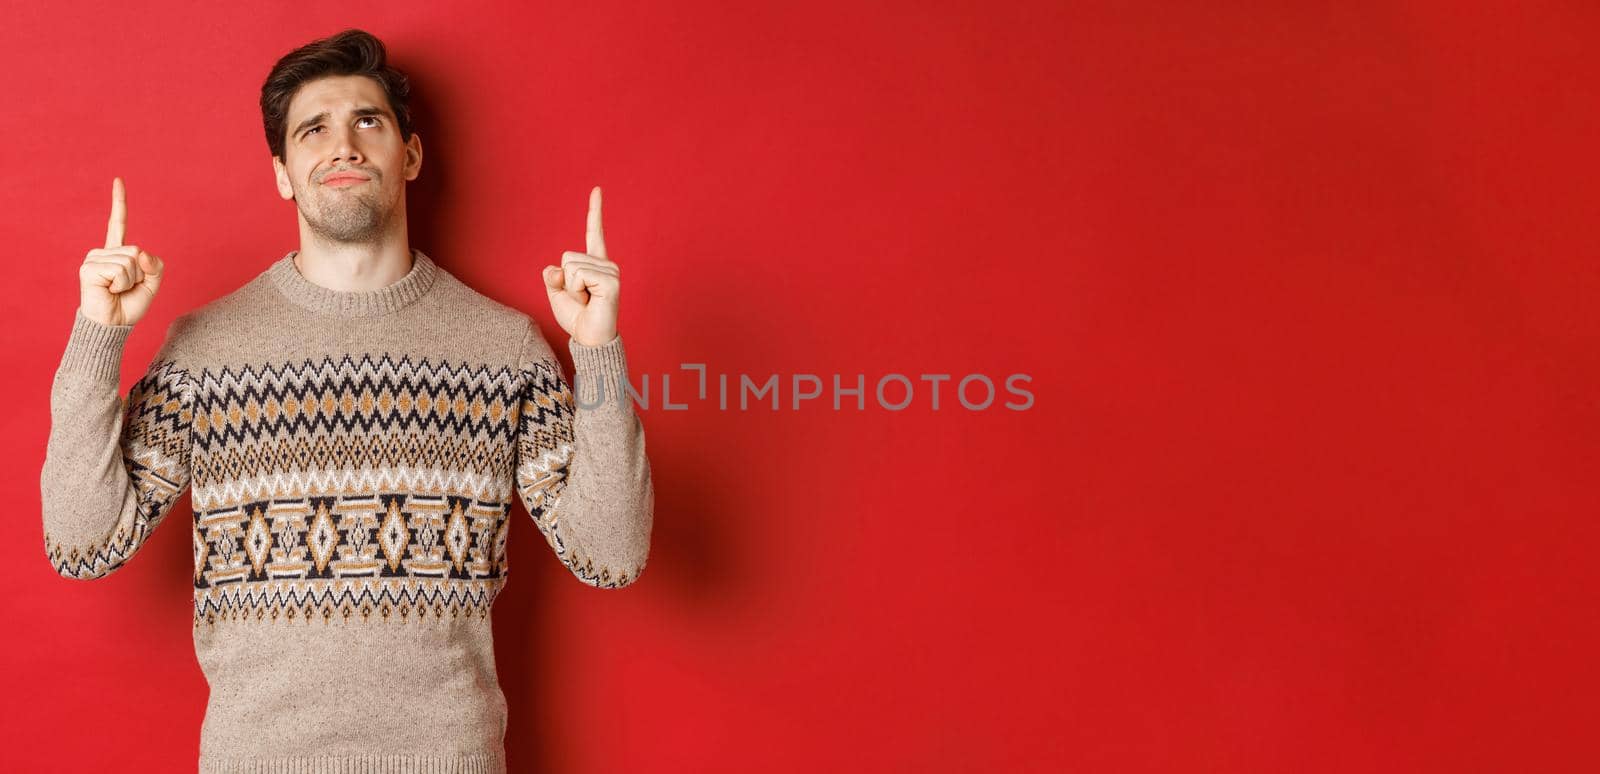 Image of disappointed and skeptical handsome man, wearing christmas sweater, smirk and frowning as looking at something bad, pointing fingers up, standing over red background.